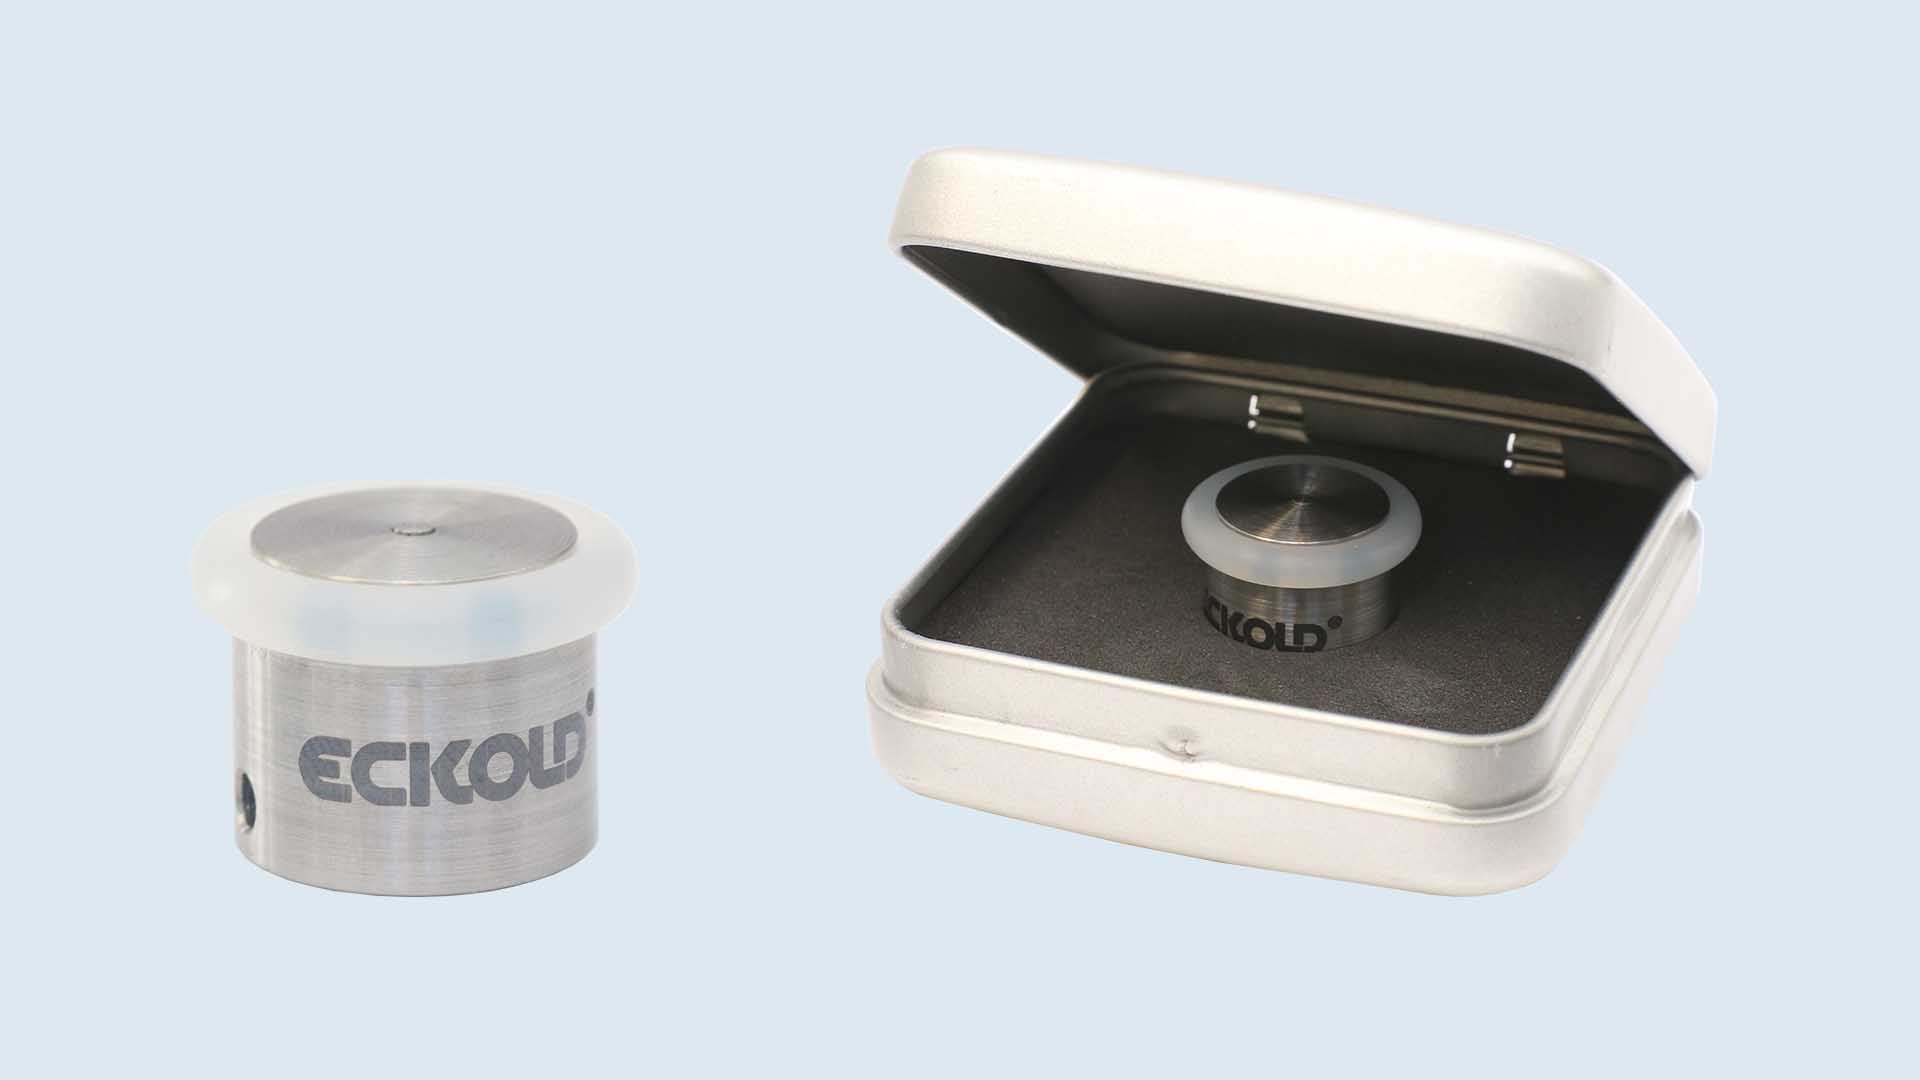 ECKOLD TeachCap – now available in stock